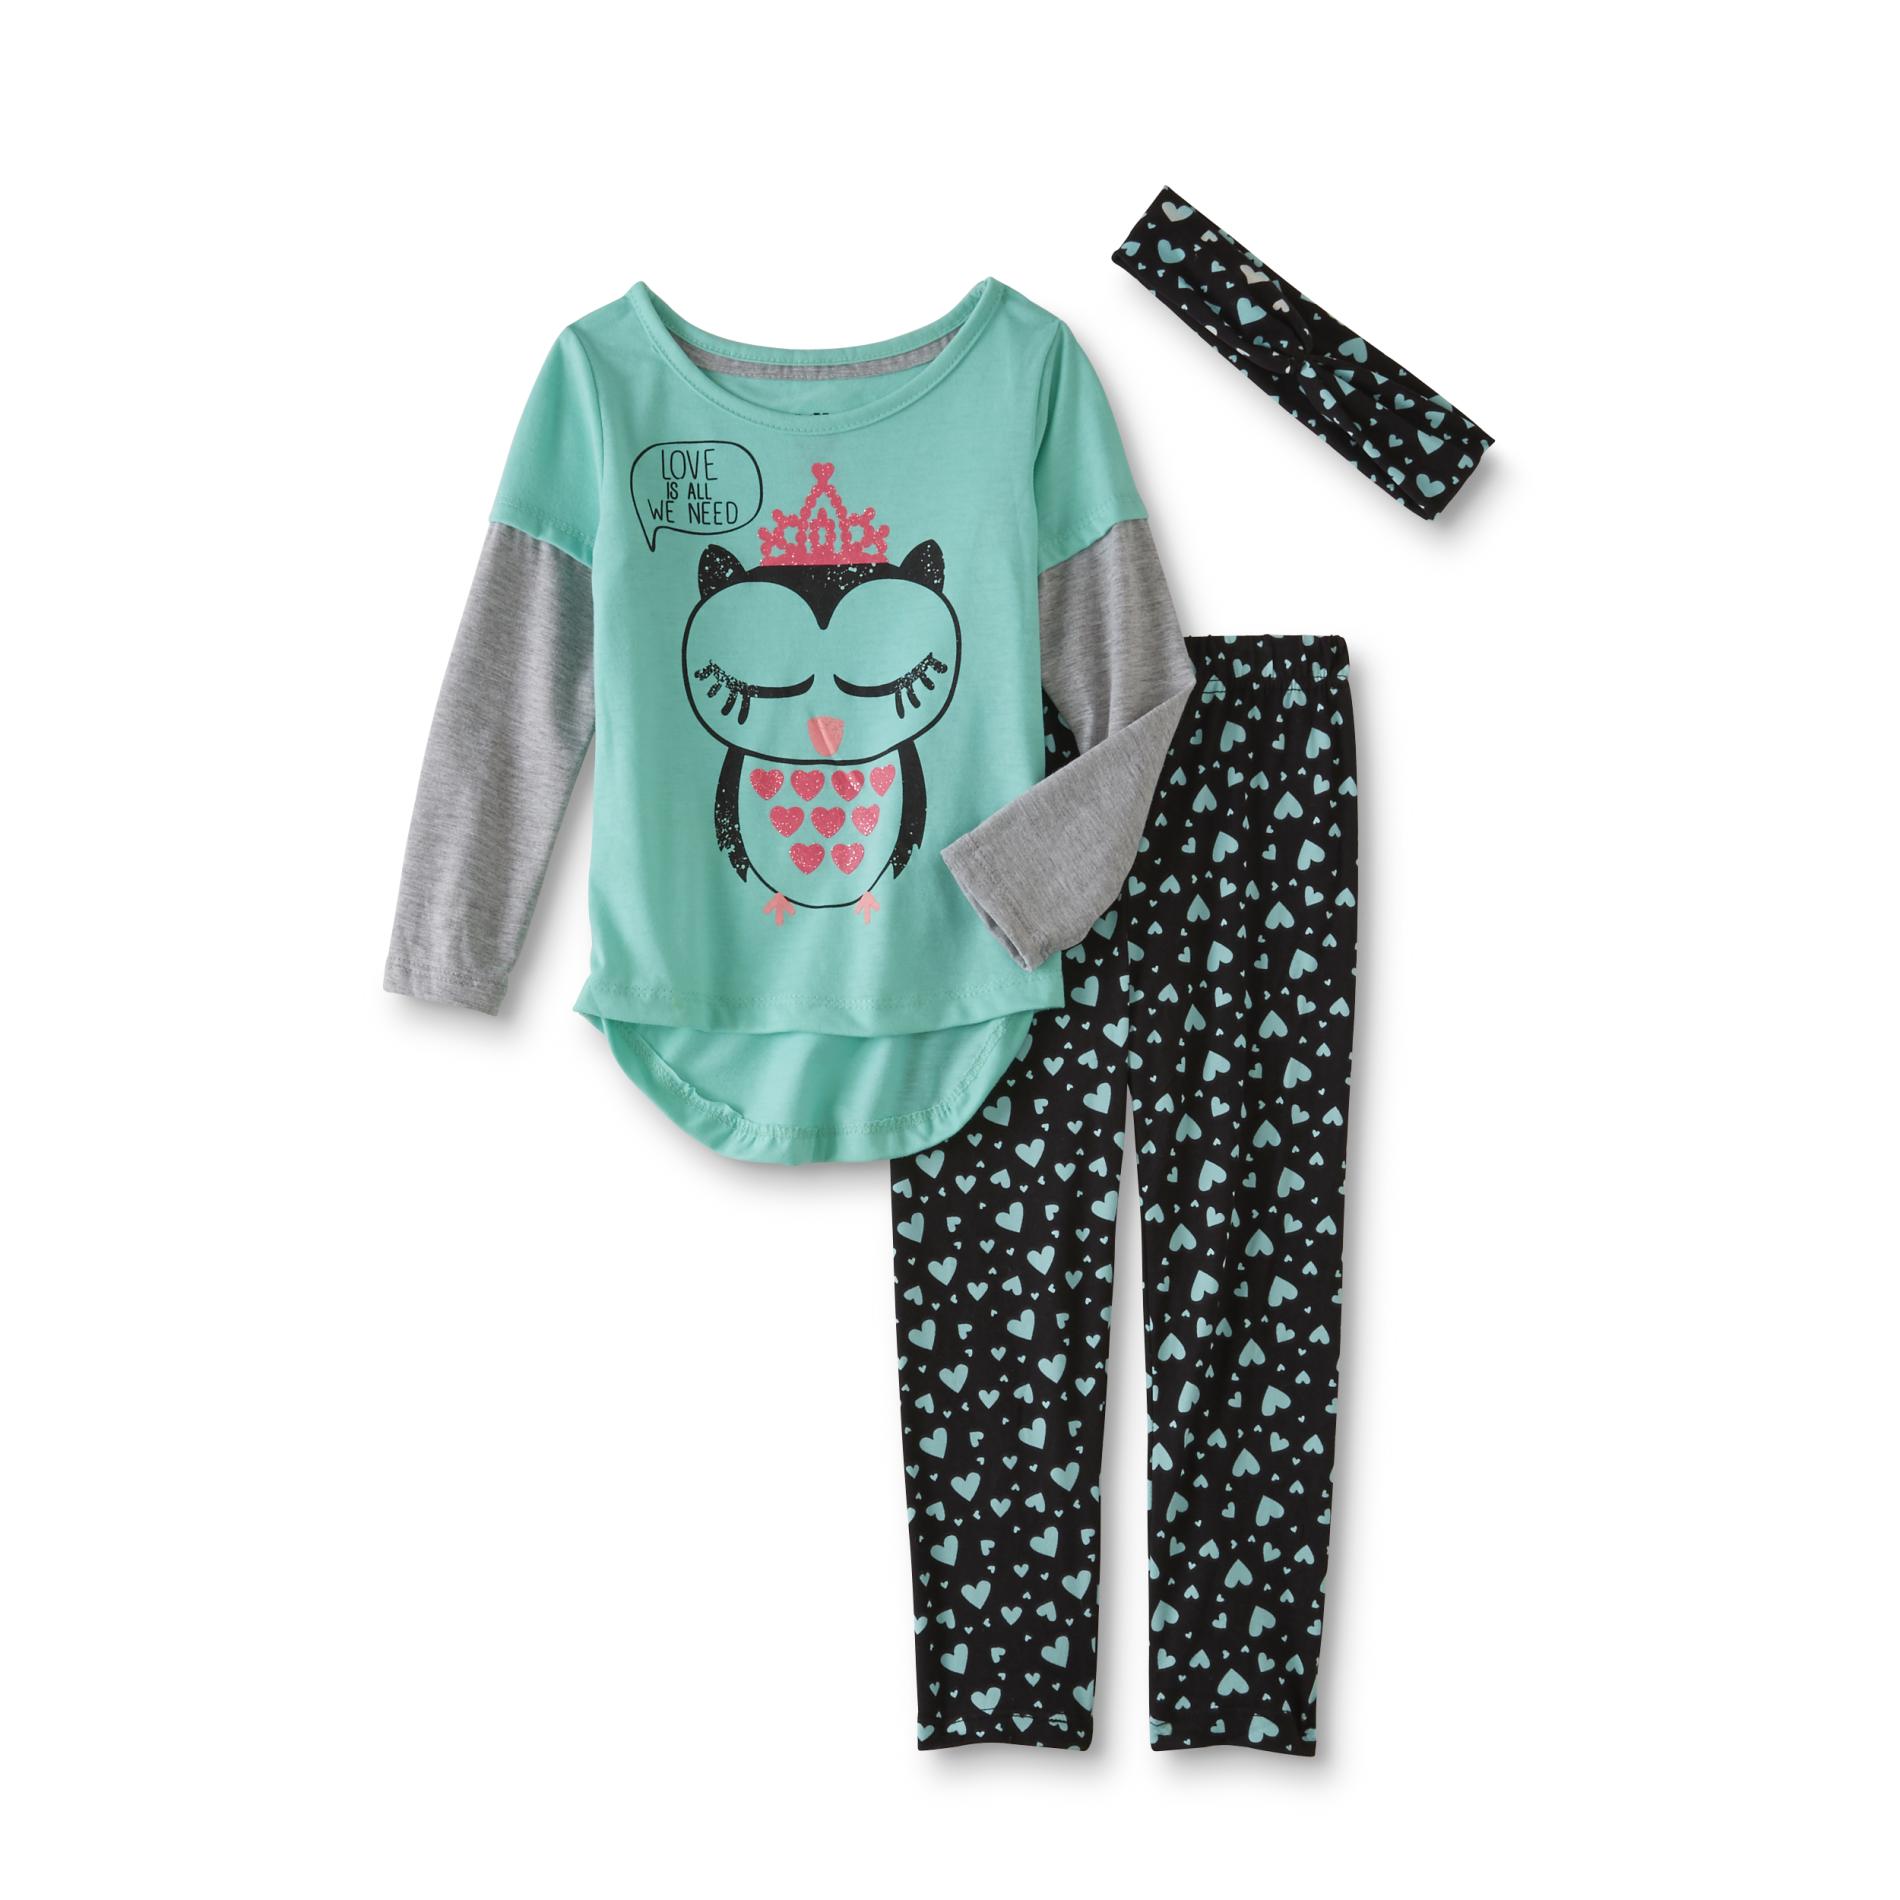 Love@FirstSight Infant & Toddler Girls' Graphic T-Shirt, Leggings & Headband - Love Is All We Need